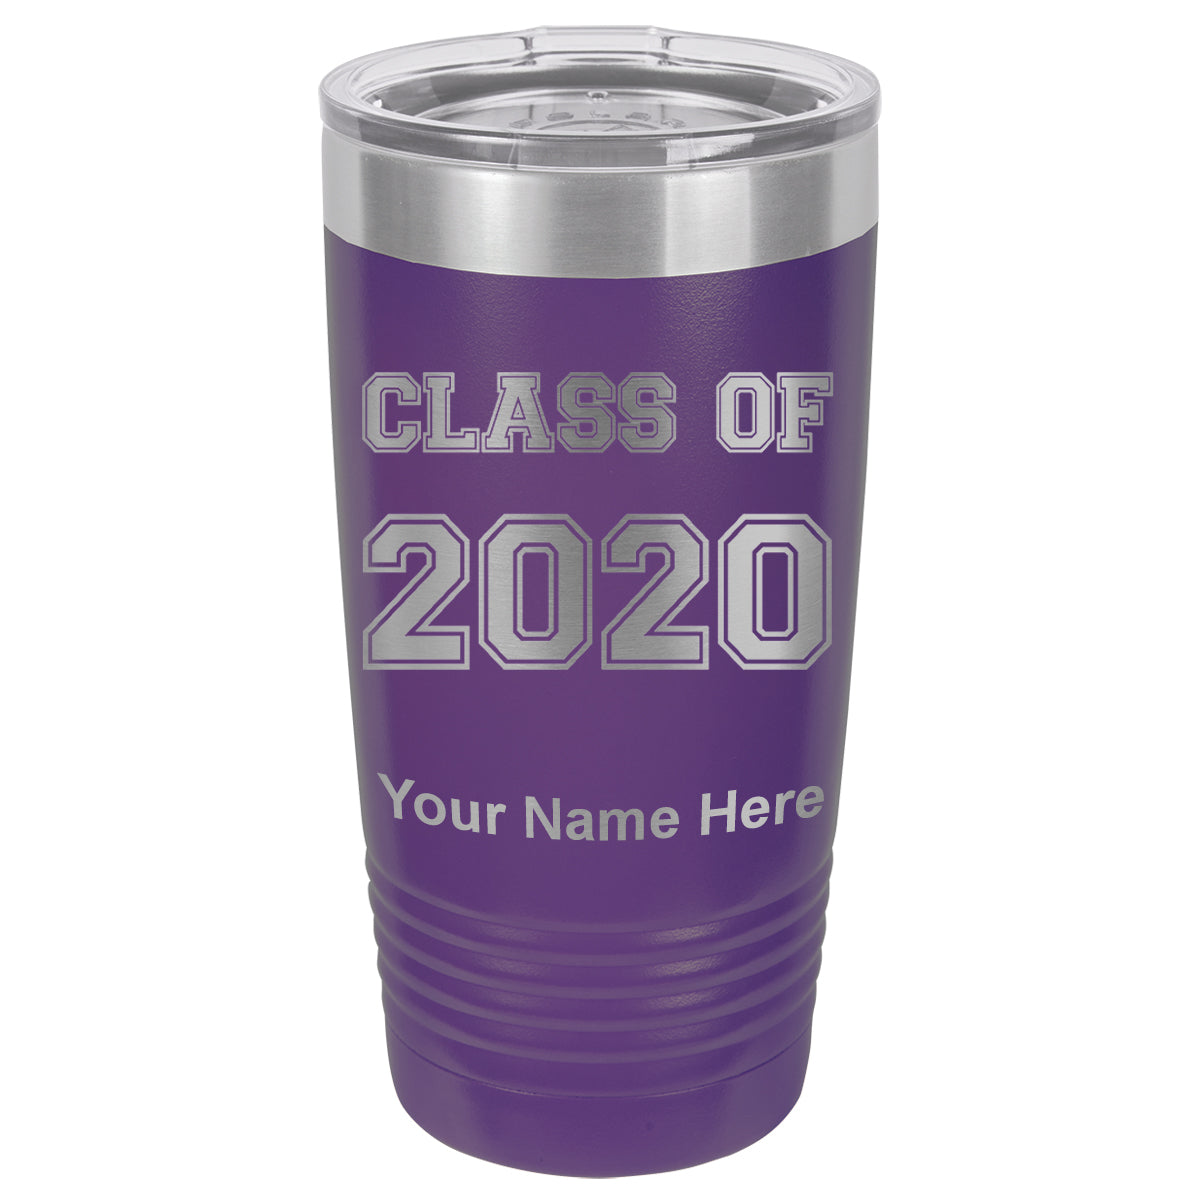 20oz Vacuum Insulated Tumbler Mug, Class of 2020, 2021, 2022, 2023 2024, 2025, Personalized Engraving Included